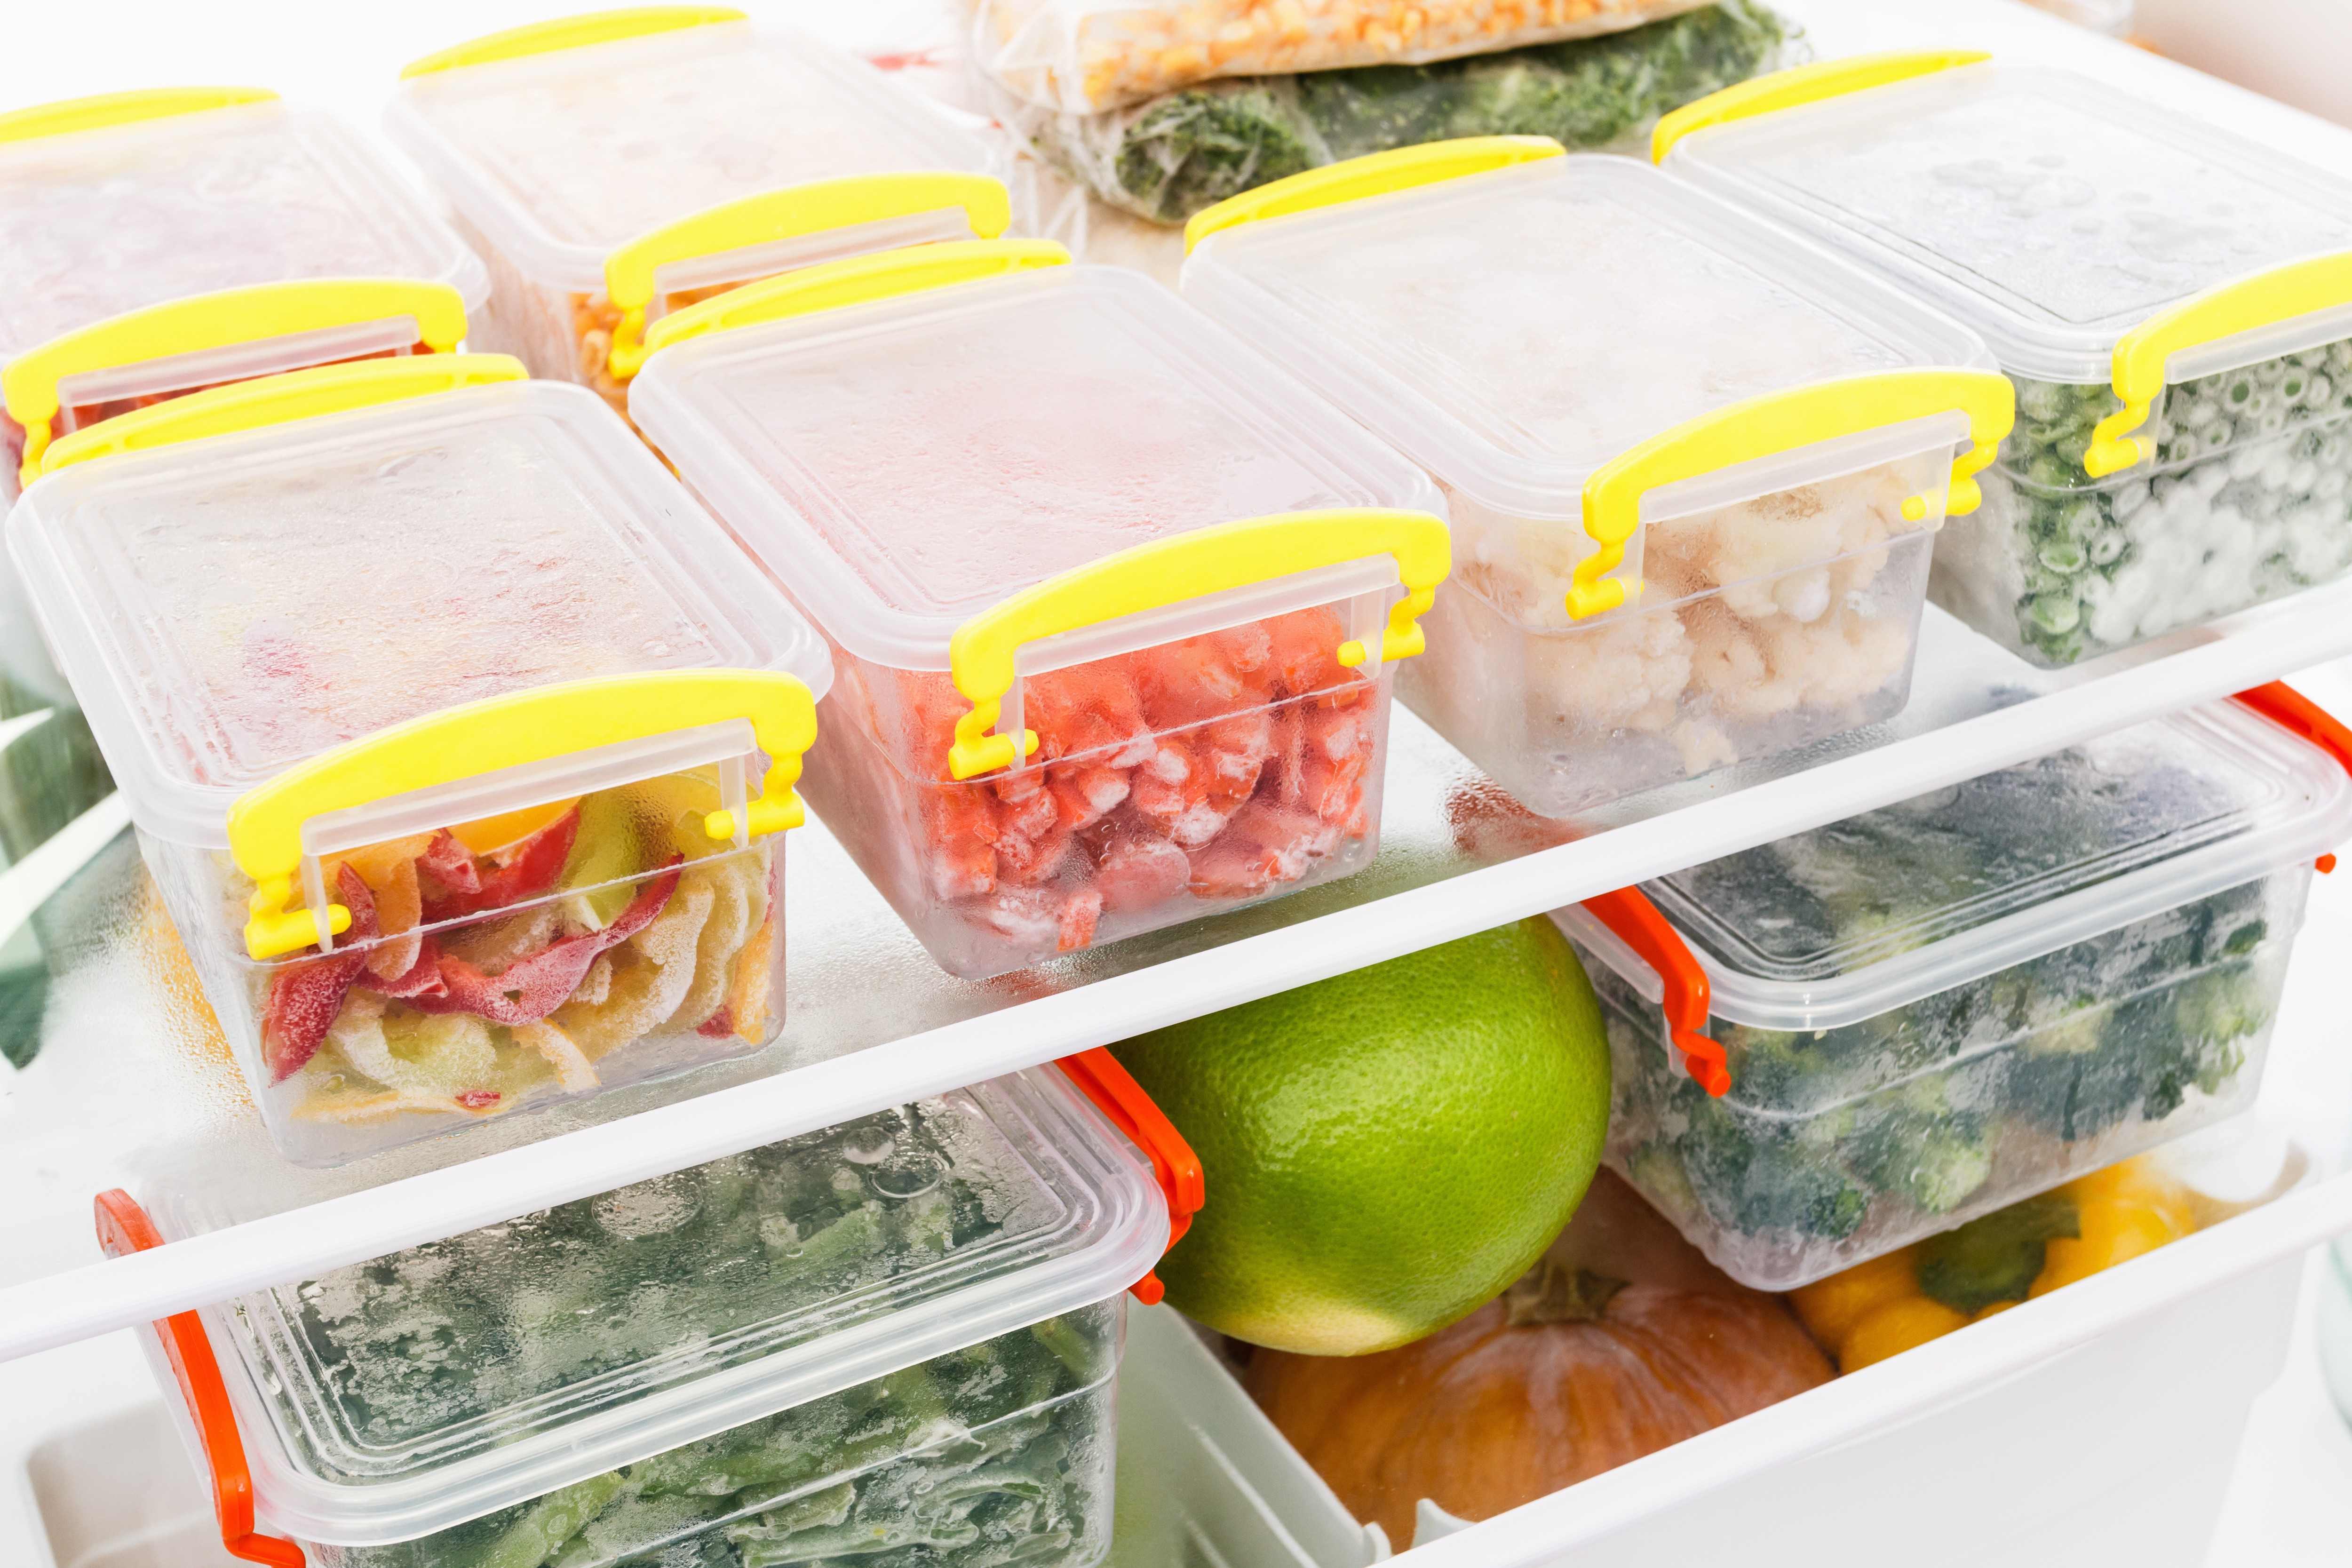 7 Handy Tips for Making Freezer Meals